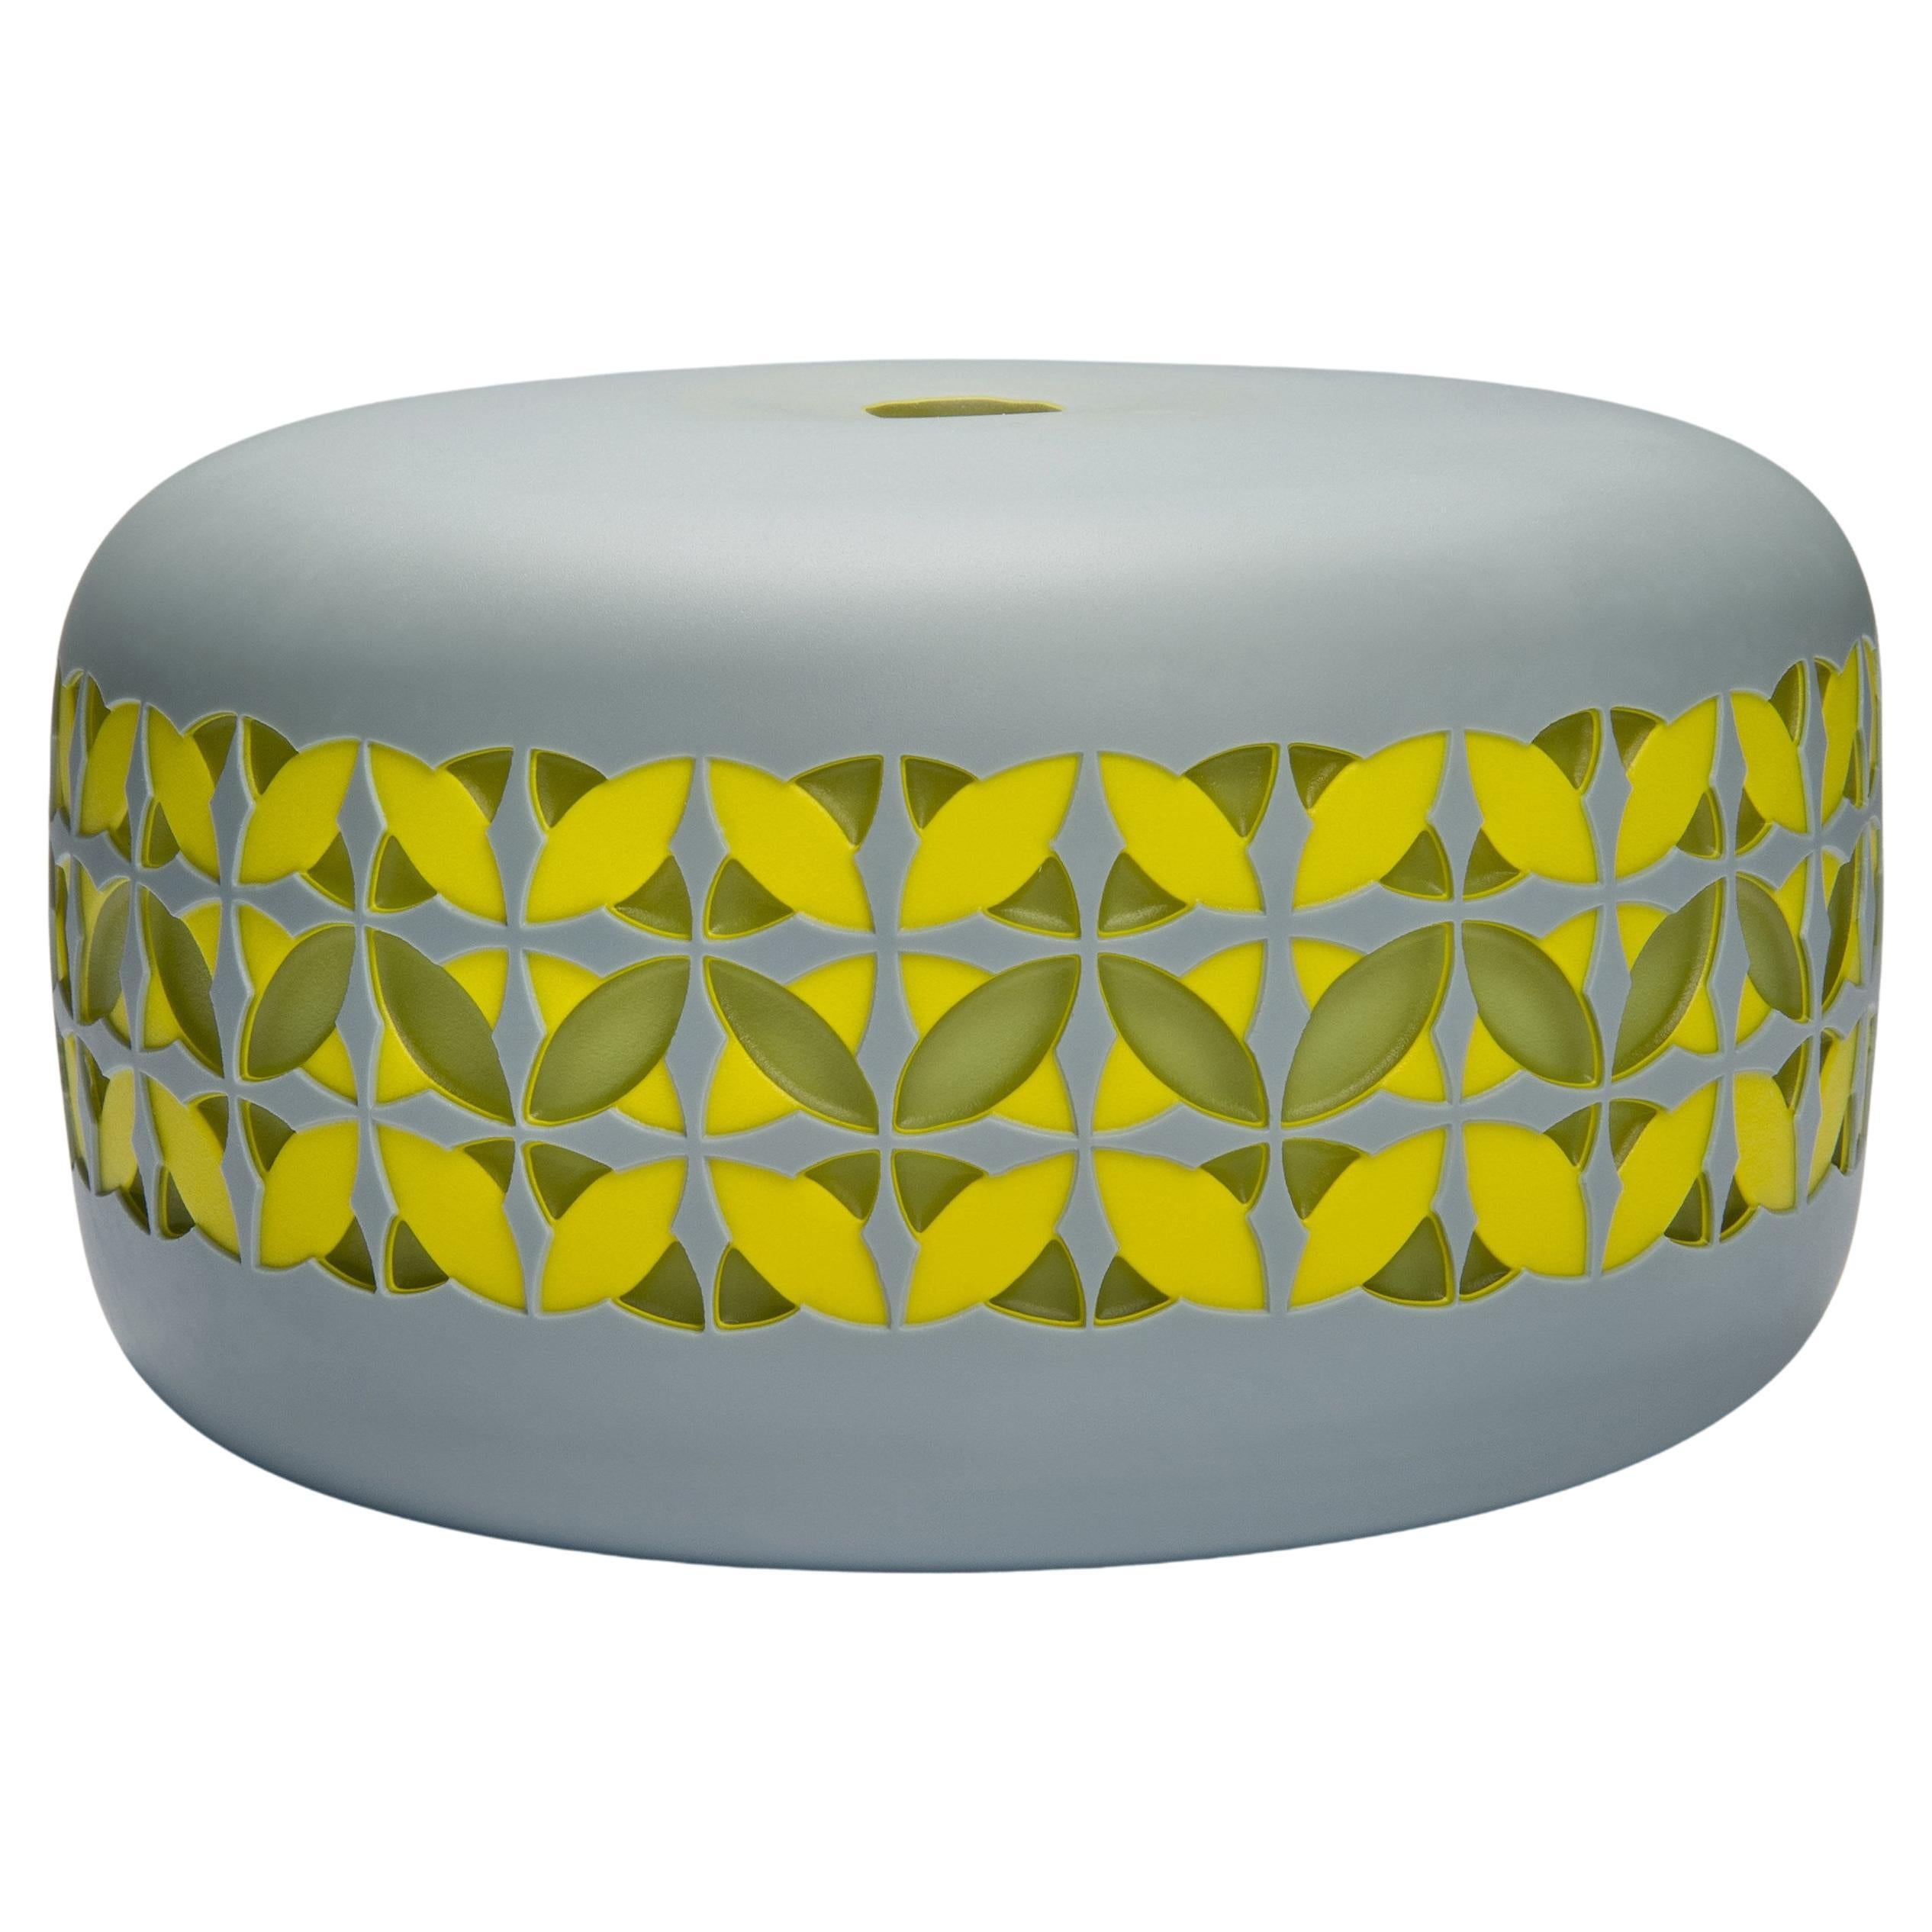 Going Round in Circles III, a Grey & Yellow Glass Artwork by Sarah Wiberley For Sale